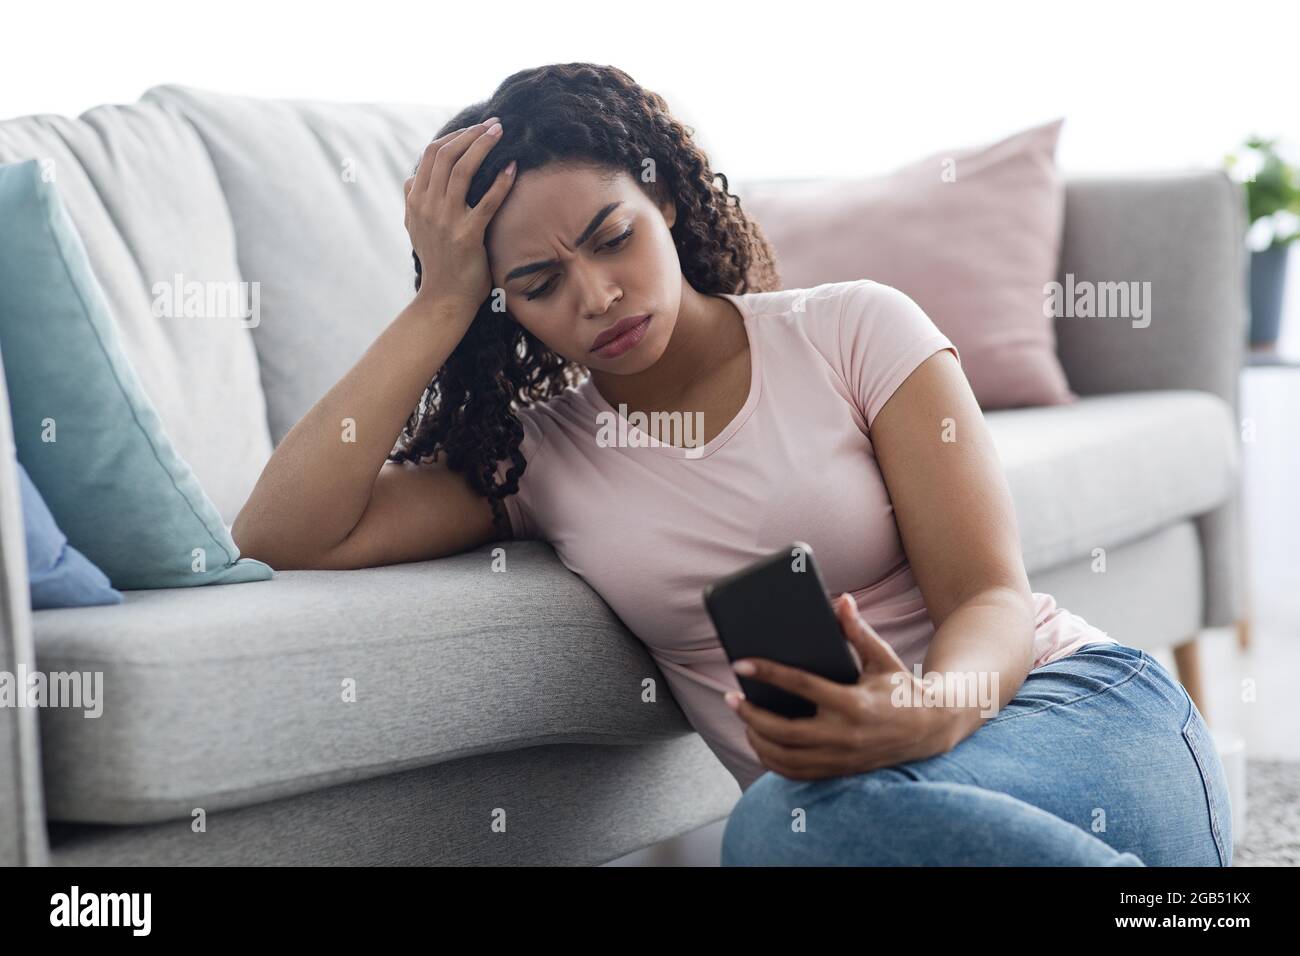 Bad news, crisis in relationship, work problems Stock Photo